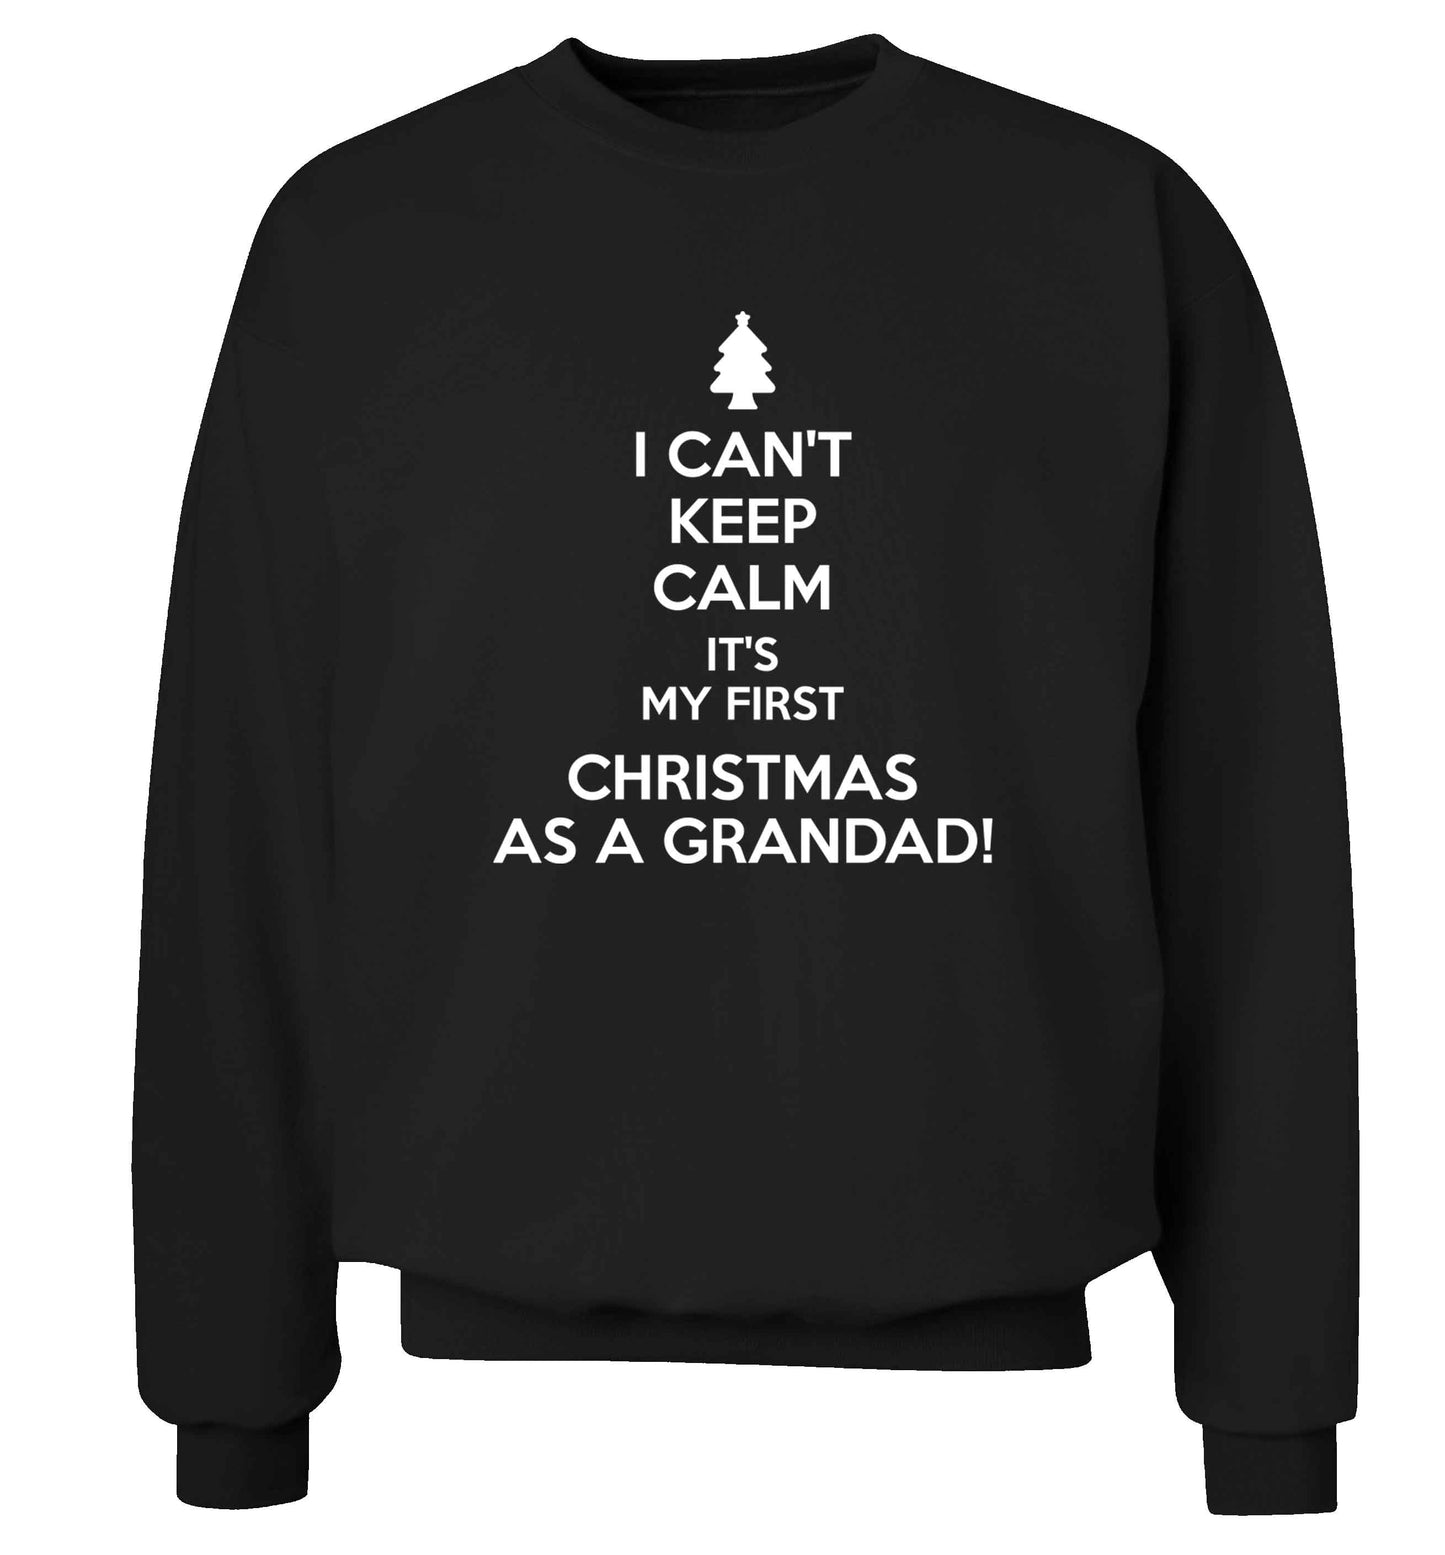 I can't keep calm it's my first Christmas as a grandad! Adult's unisex black Sweater 2XL